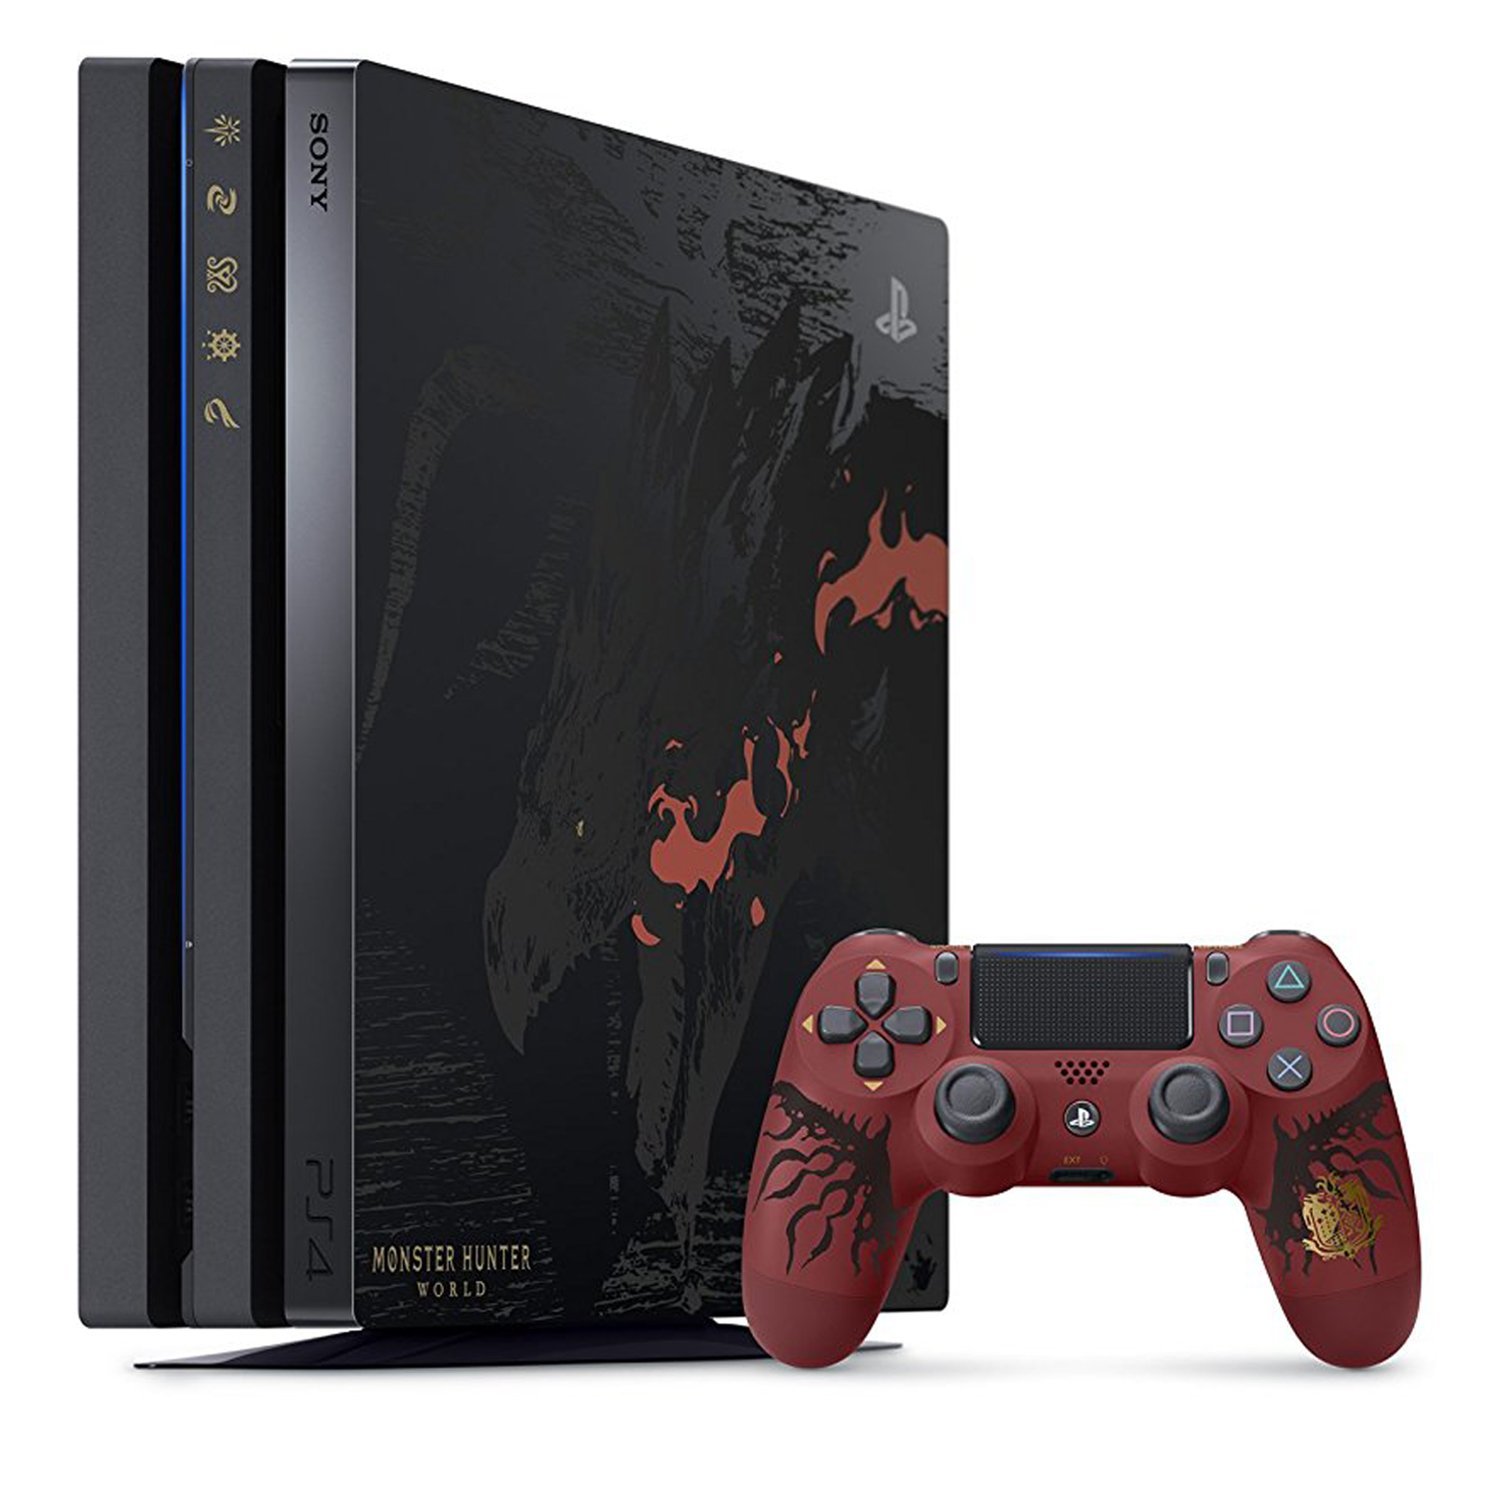 Hunter ps4. Sony ps4 Pro 1tb. Sony ps4 Pro Limited Edition. PLAYSTATION 4 Slim 1tb Limited Edition. Monster Hunter ps4 Pro 1tb.